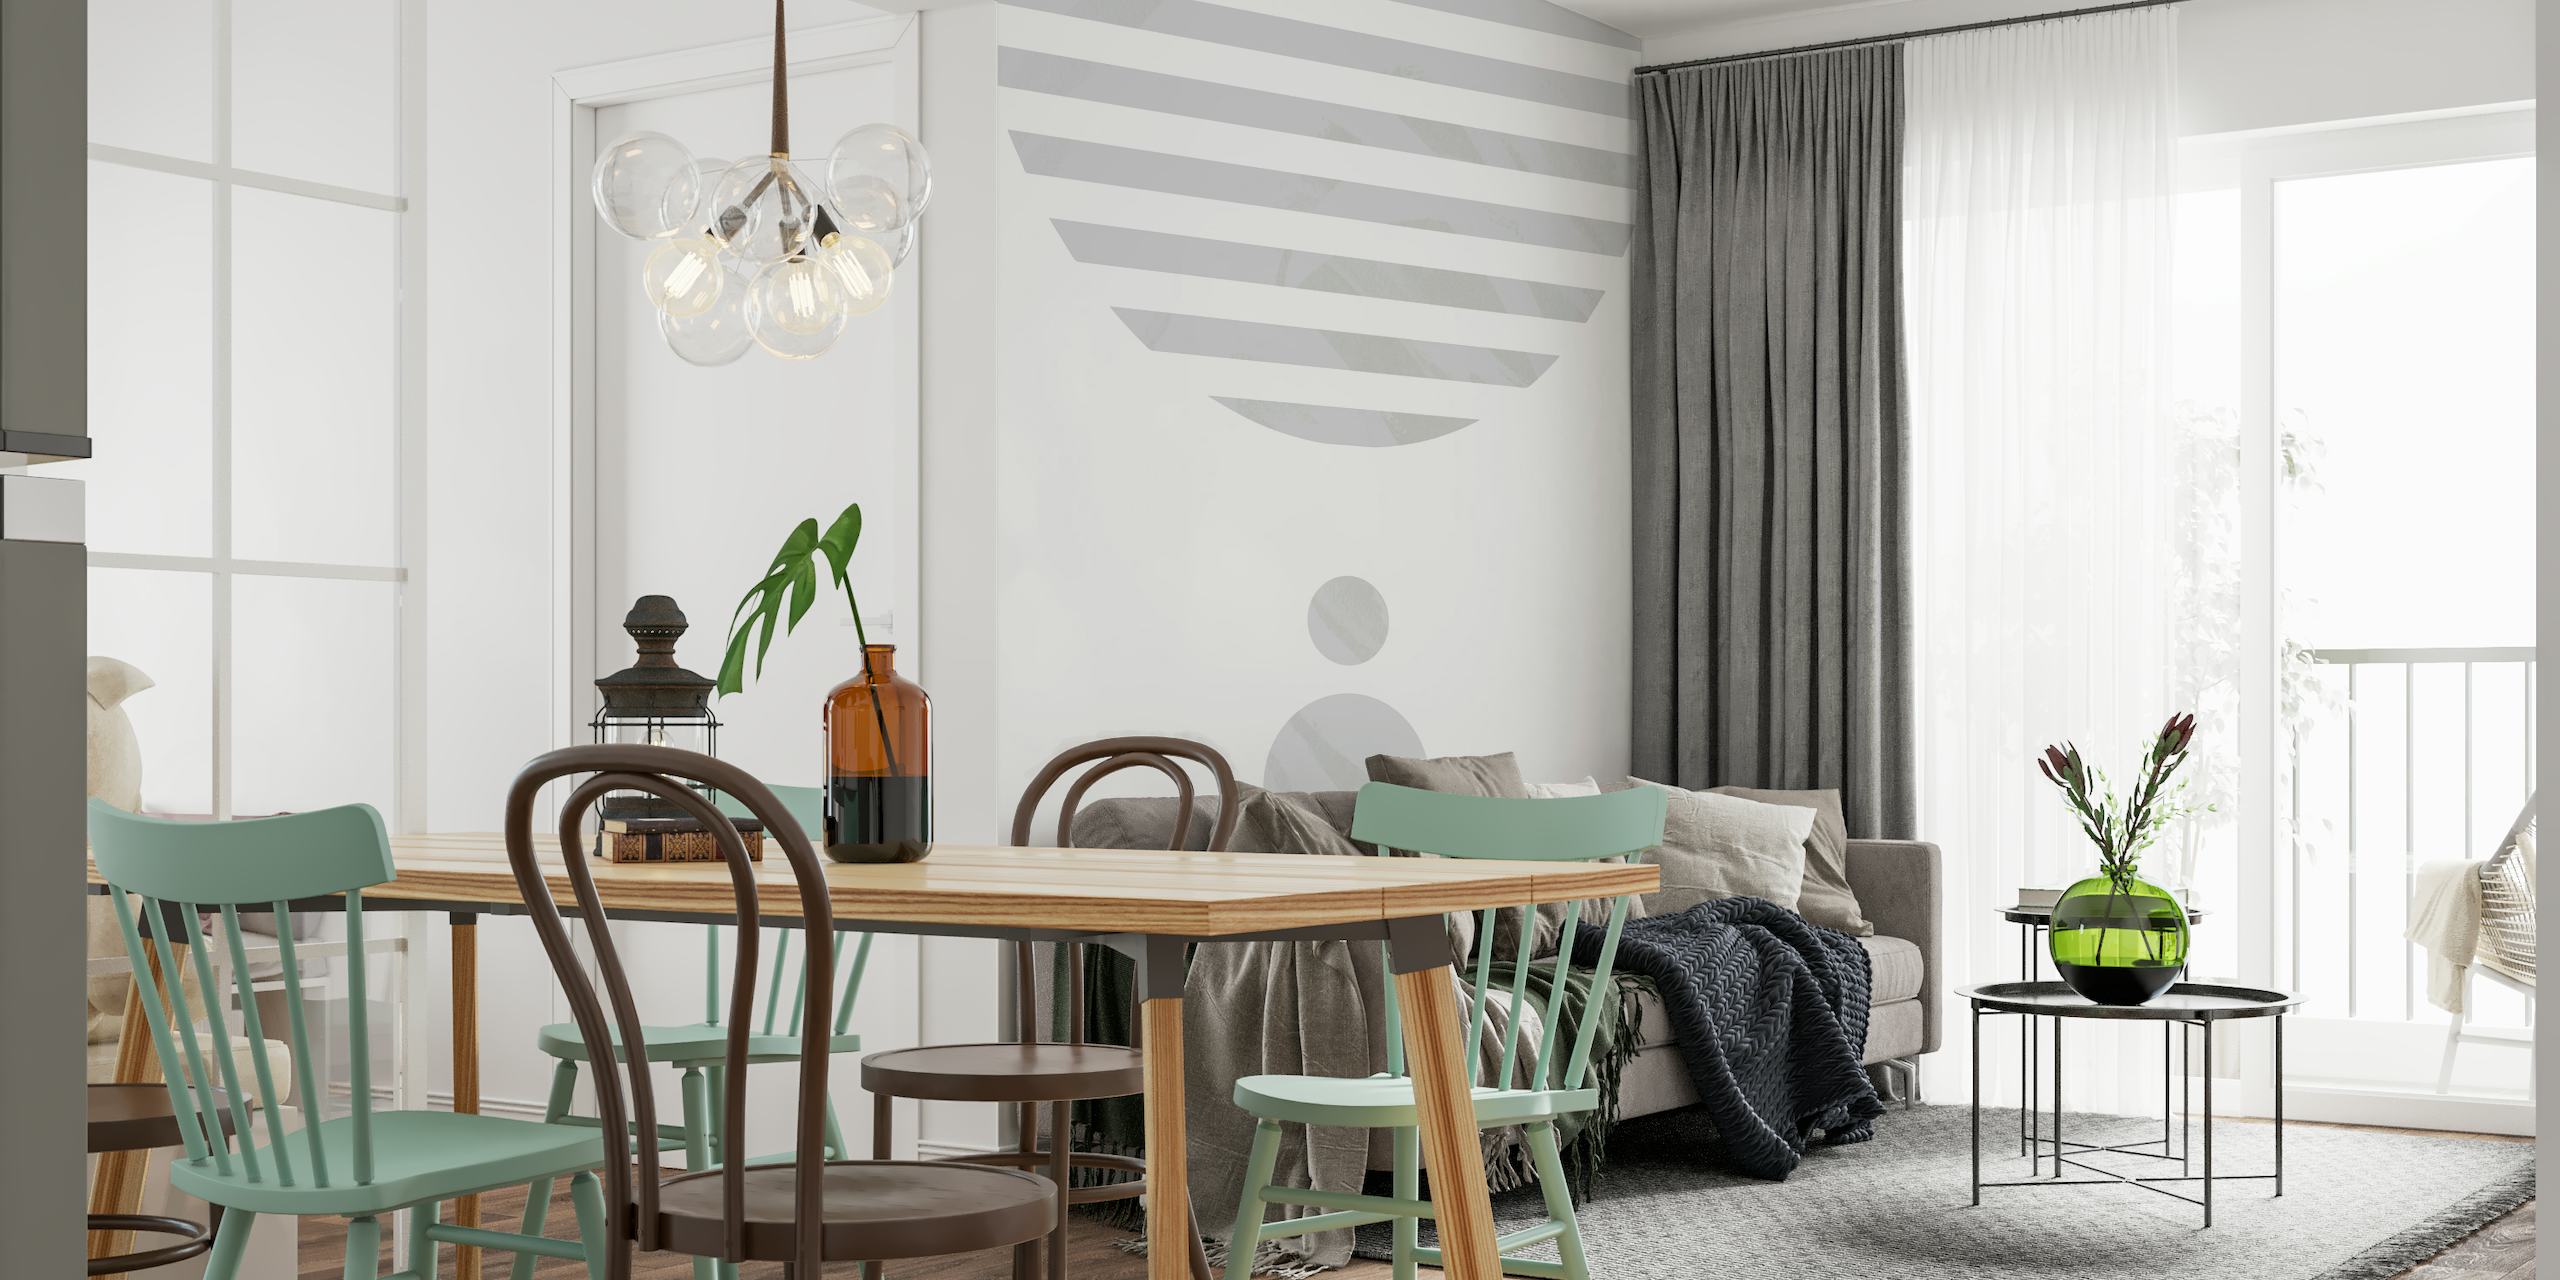 Stylized mid-century modern inspired wall mural with abstract geometric shapes